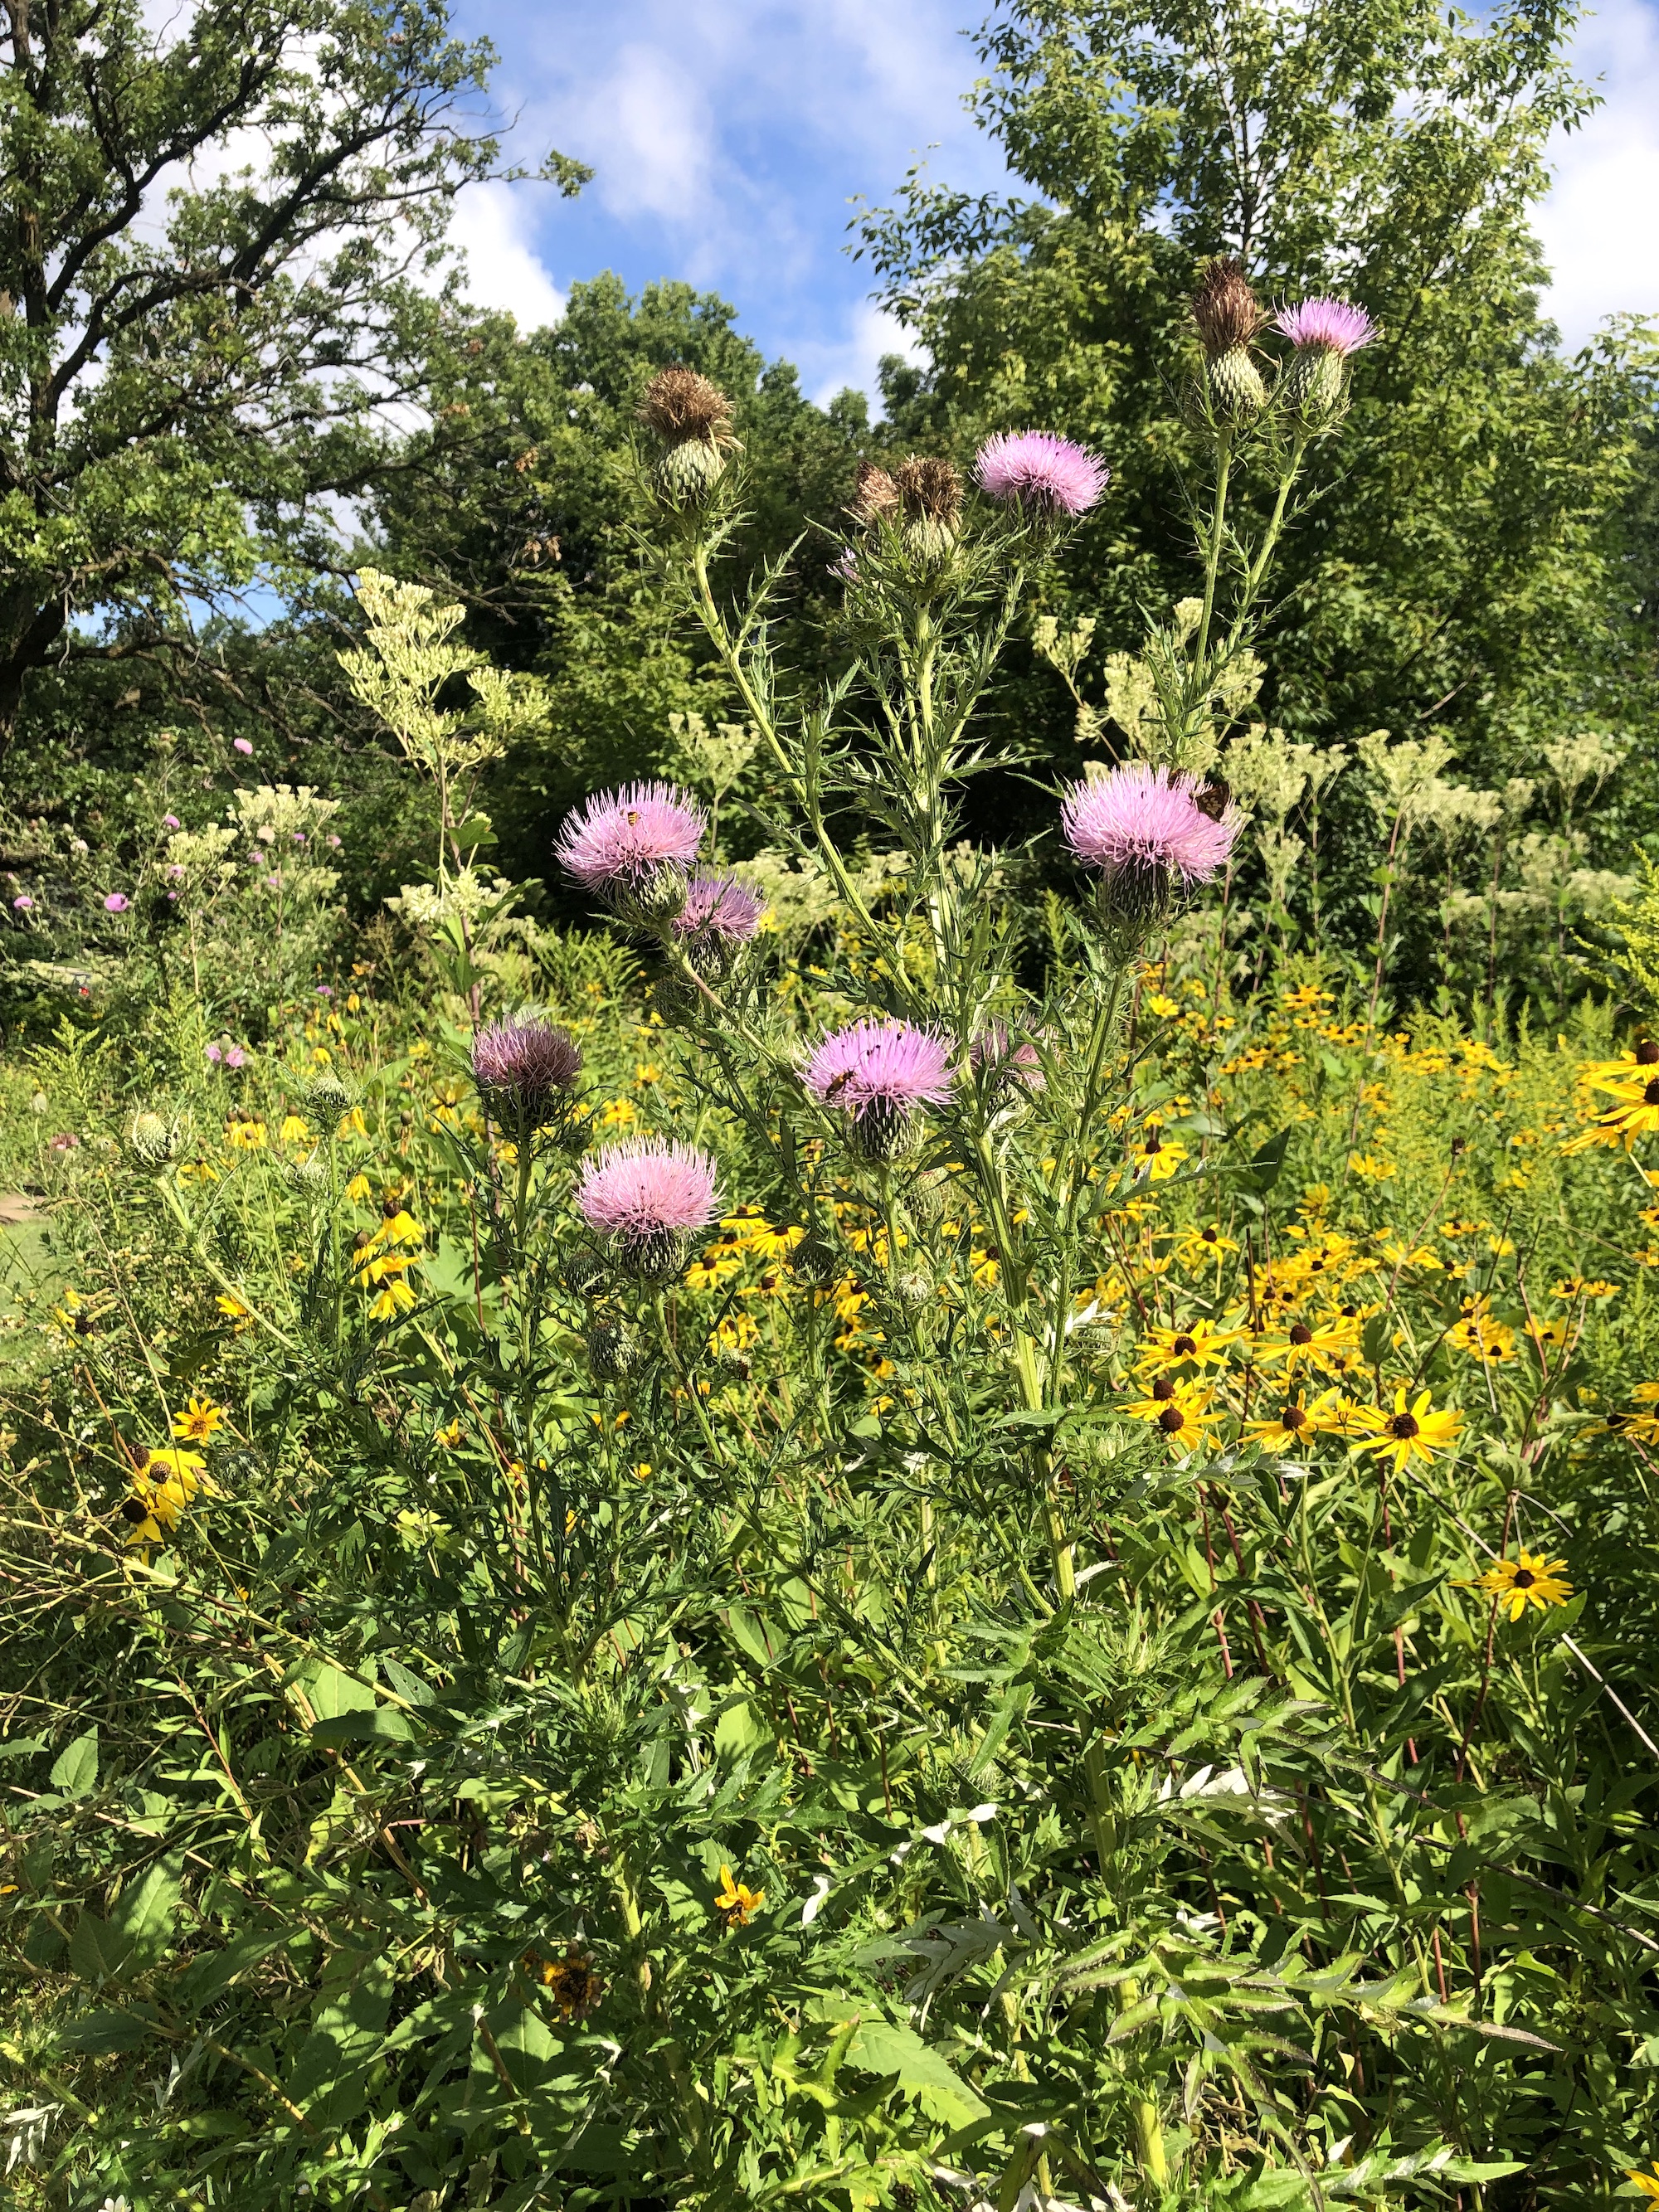 Field Thistle near the UW Arboretum Seminiole Highway entrance in Madison, Wisconsin on August 15, 2022.